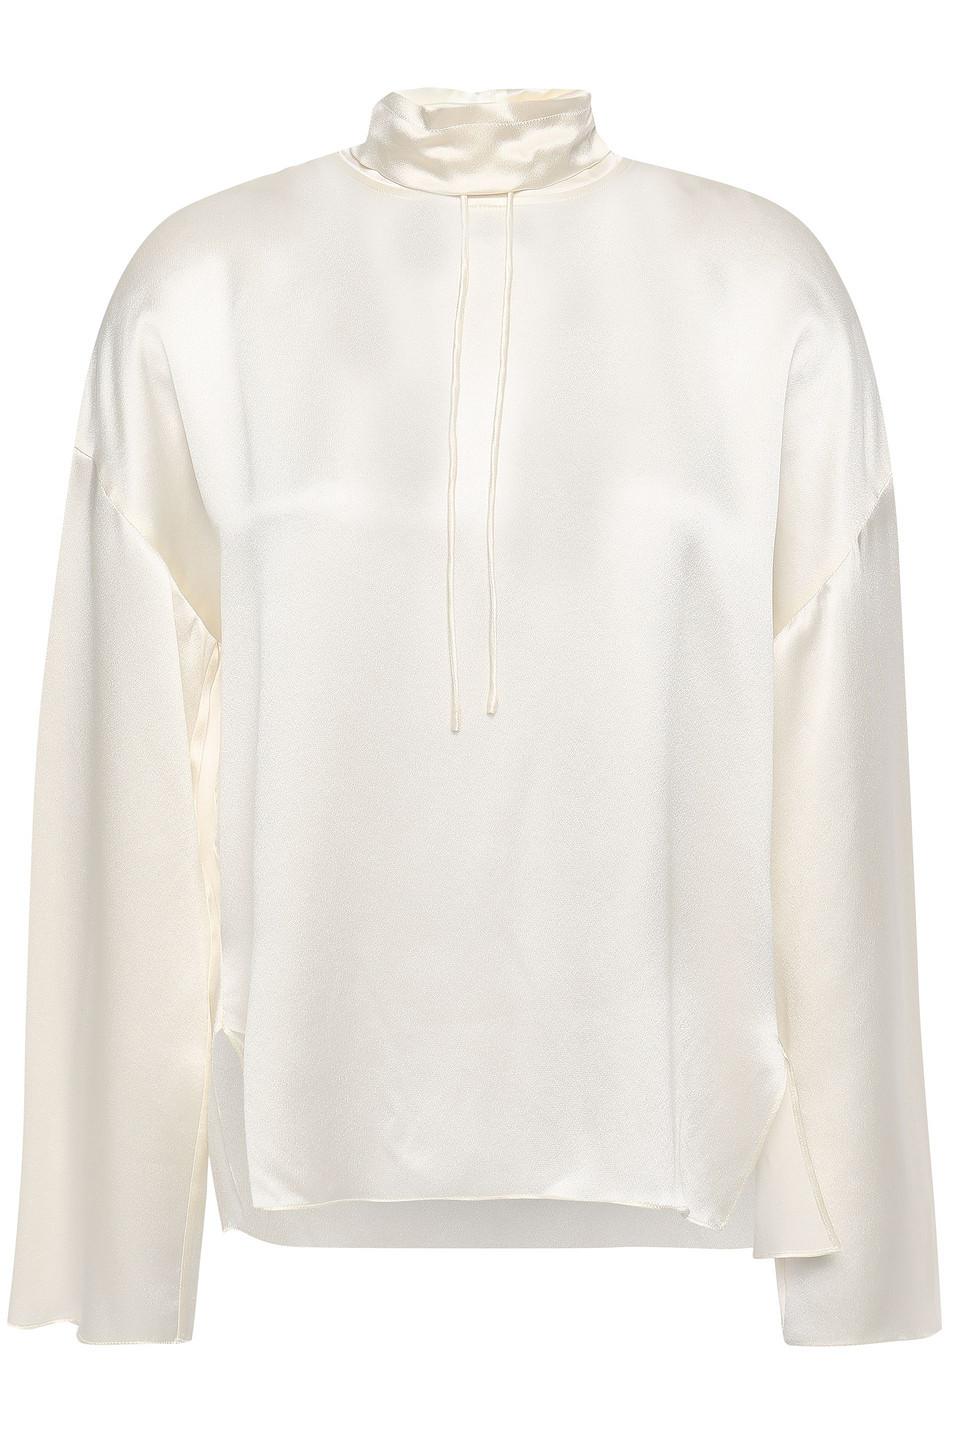 Vince Silk-satin Blouse Ivory in White - Lyst